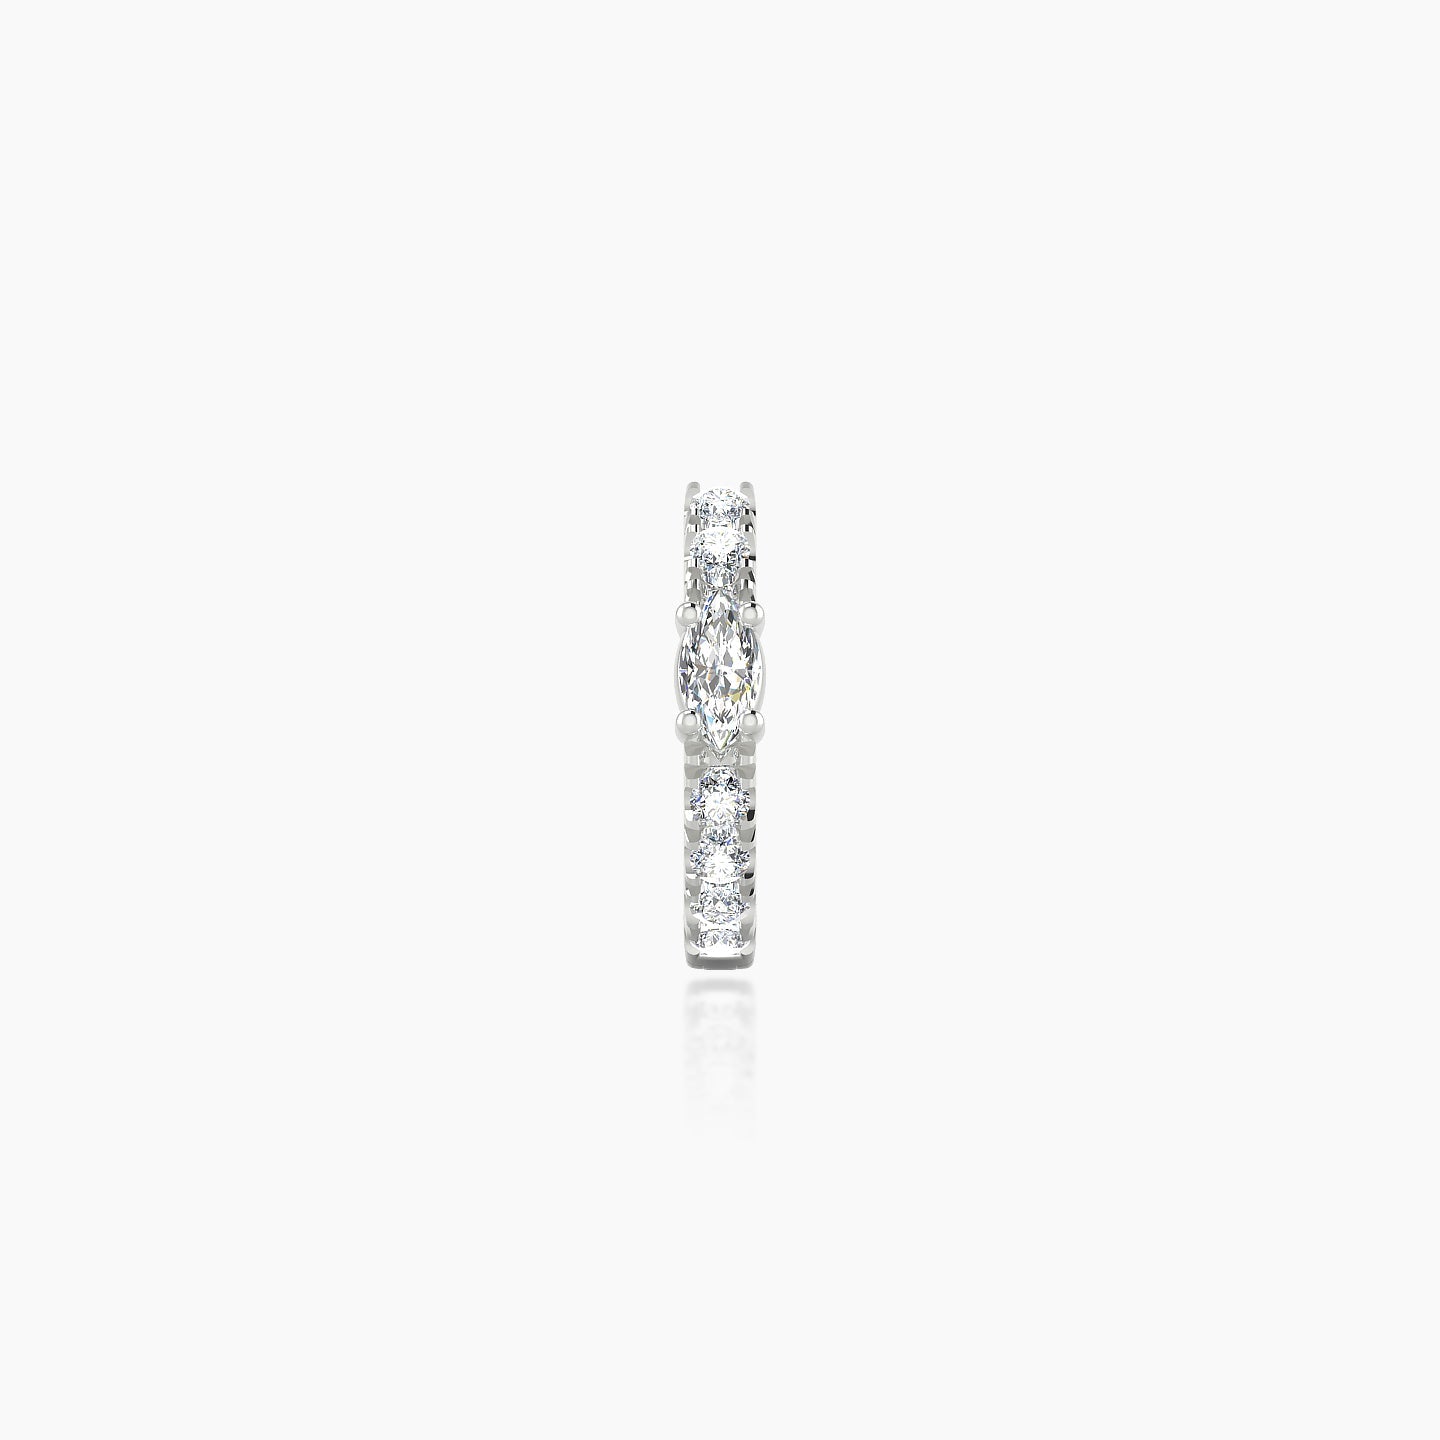 Inanna | 18k White Gold 6.5 mm Marquise Diamond Nose Ring Piercing